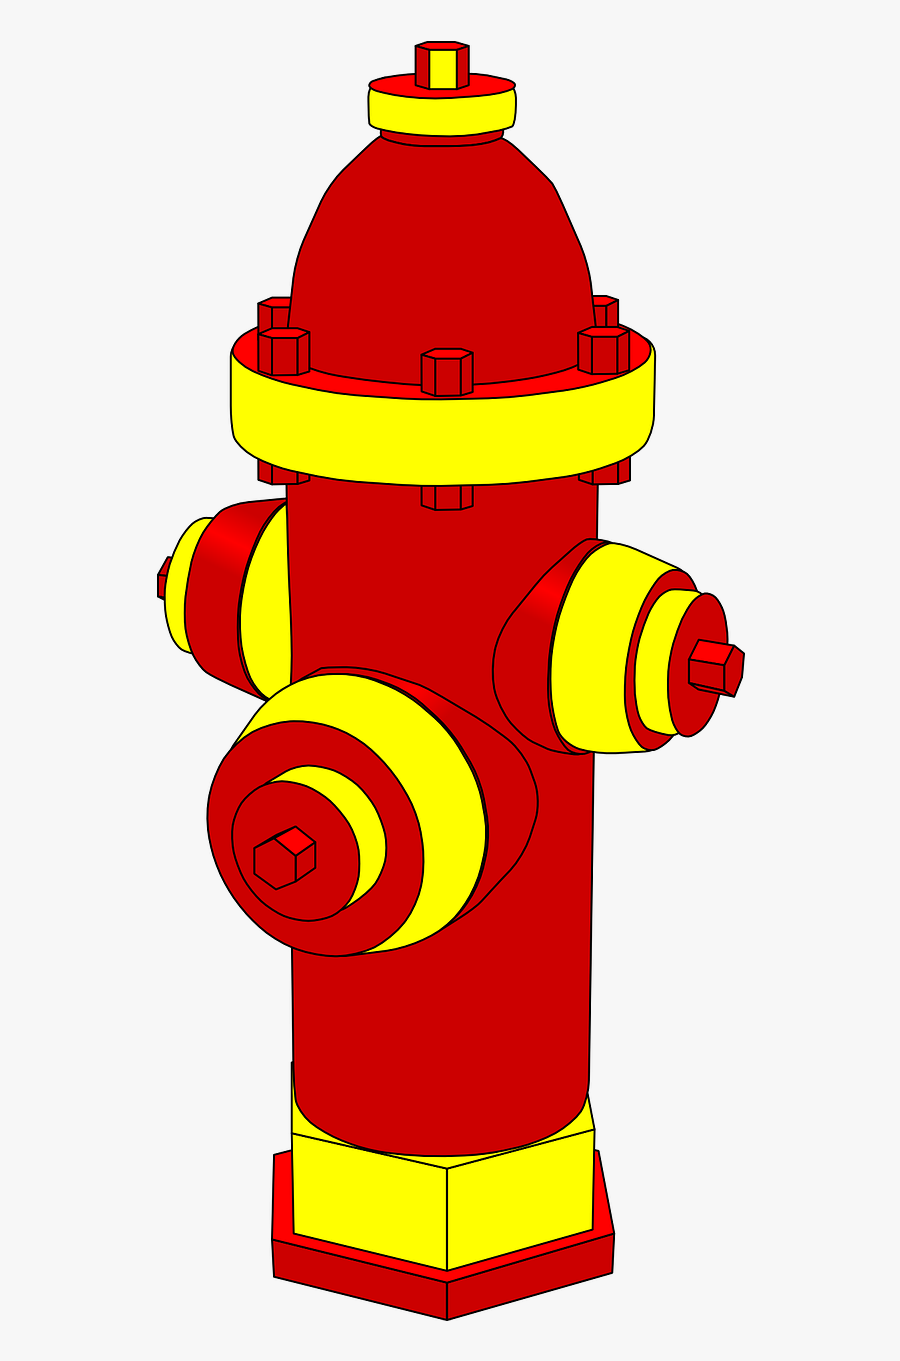 Hydrant Fire Emergency Free Picture - Fire Hydrant Clipart Png, Transparent Clipart